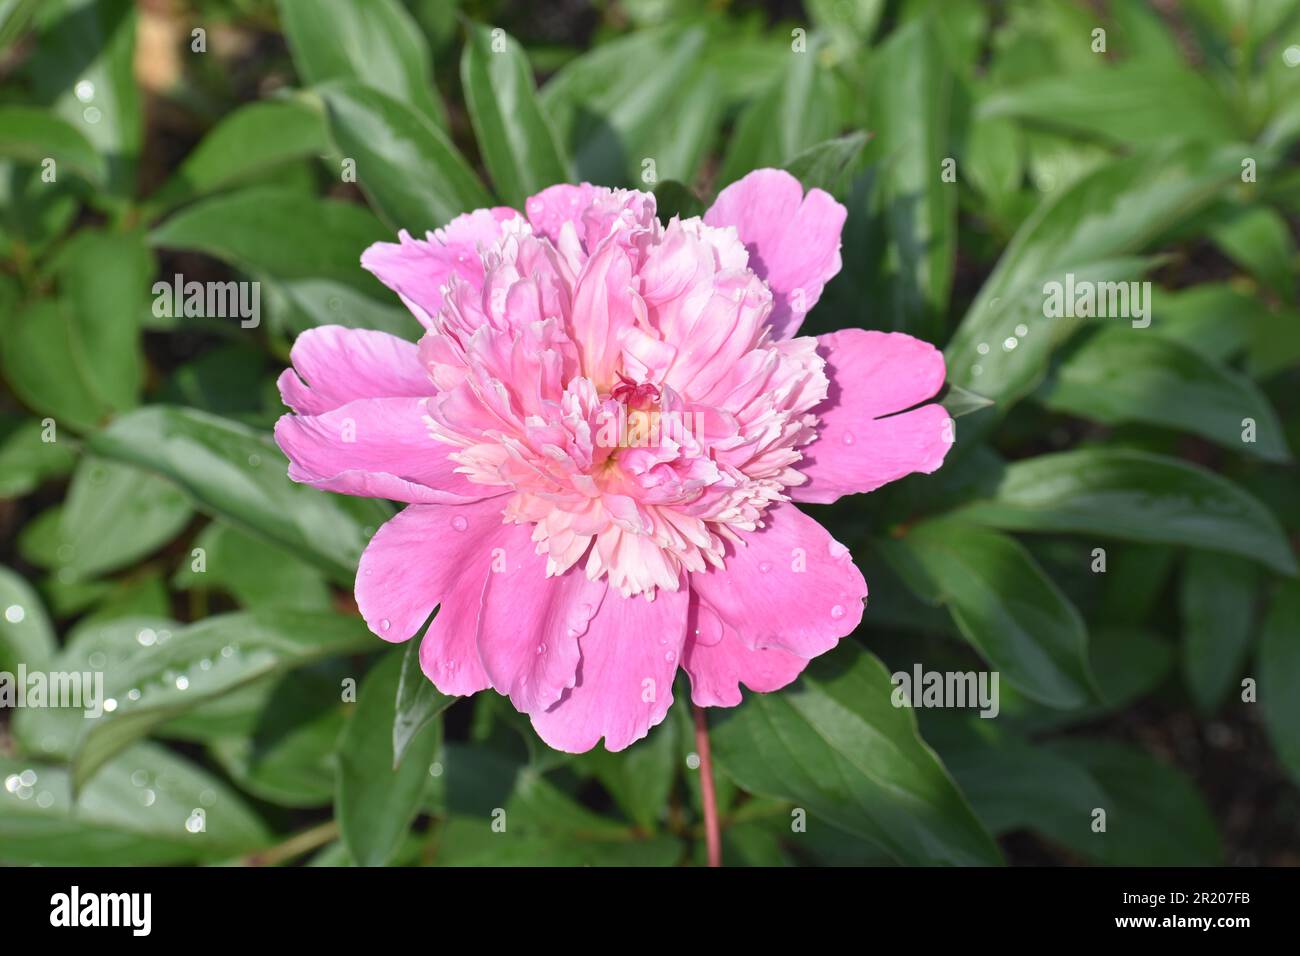 A pink peony, Paeonia officinalis, with fully opened flowers. Stock Photo